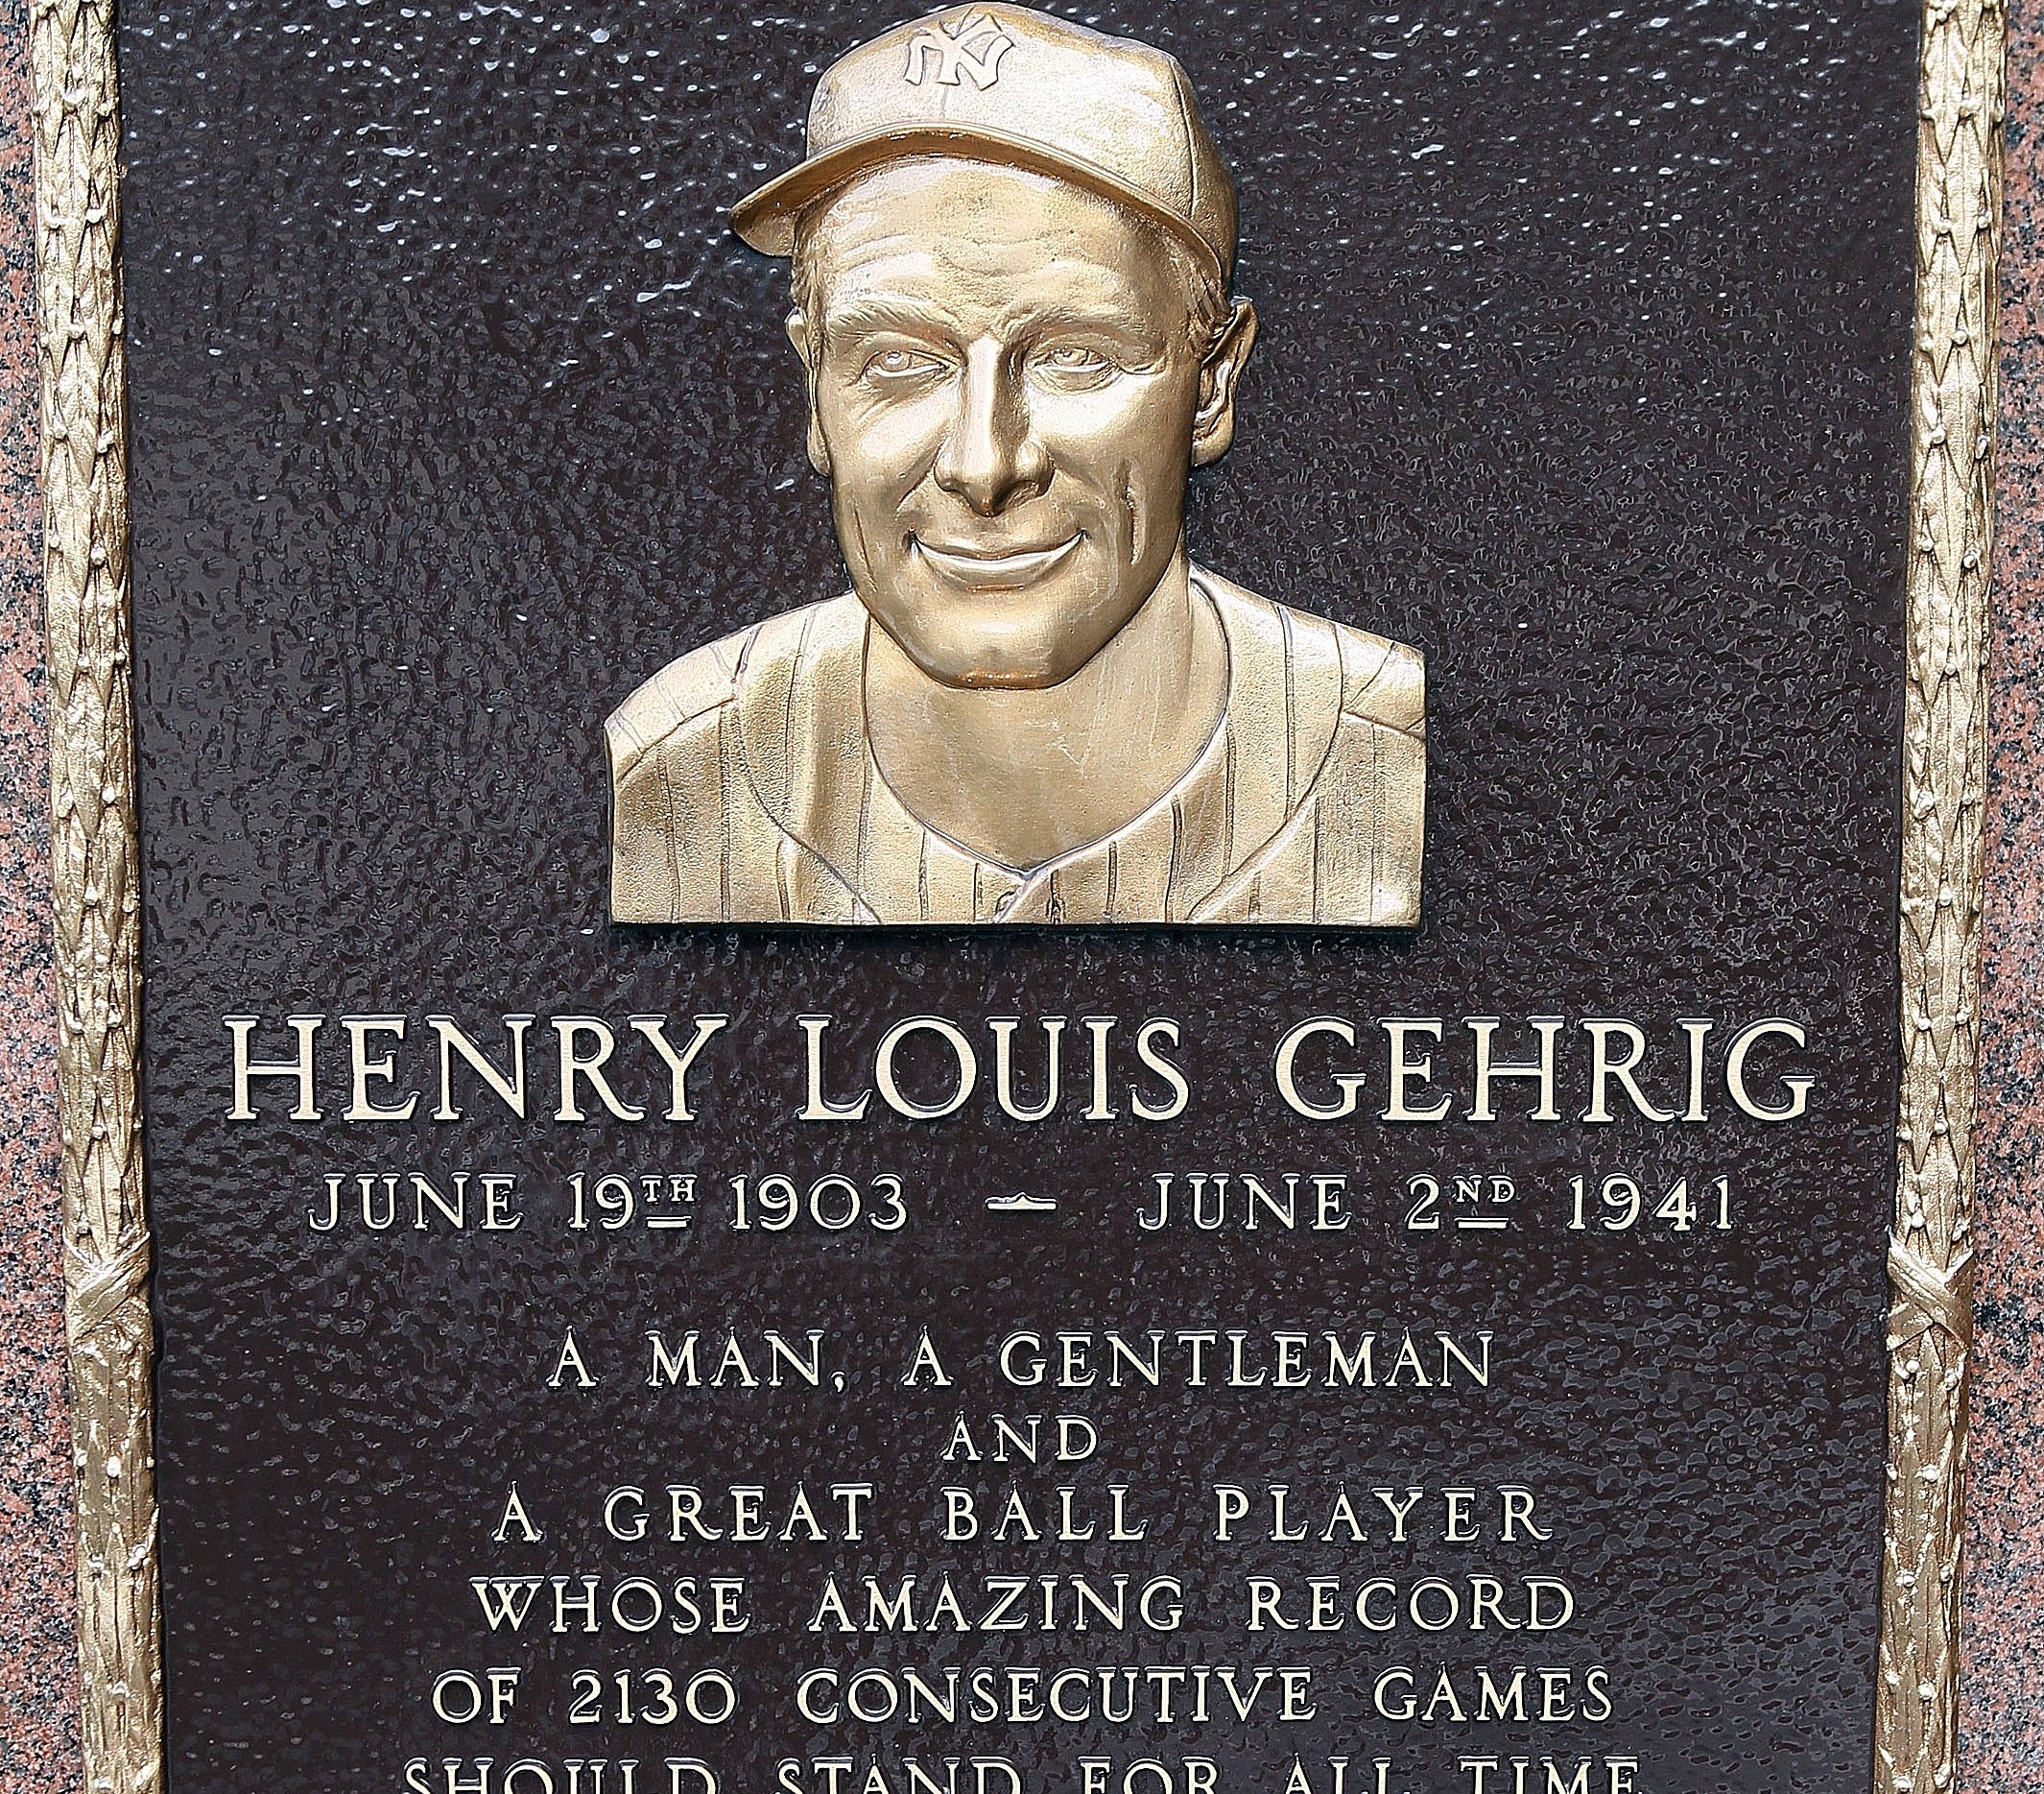 75 years later, Lou Gehrig's farewell speech is still